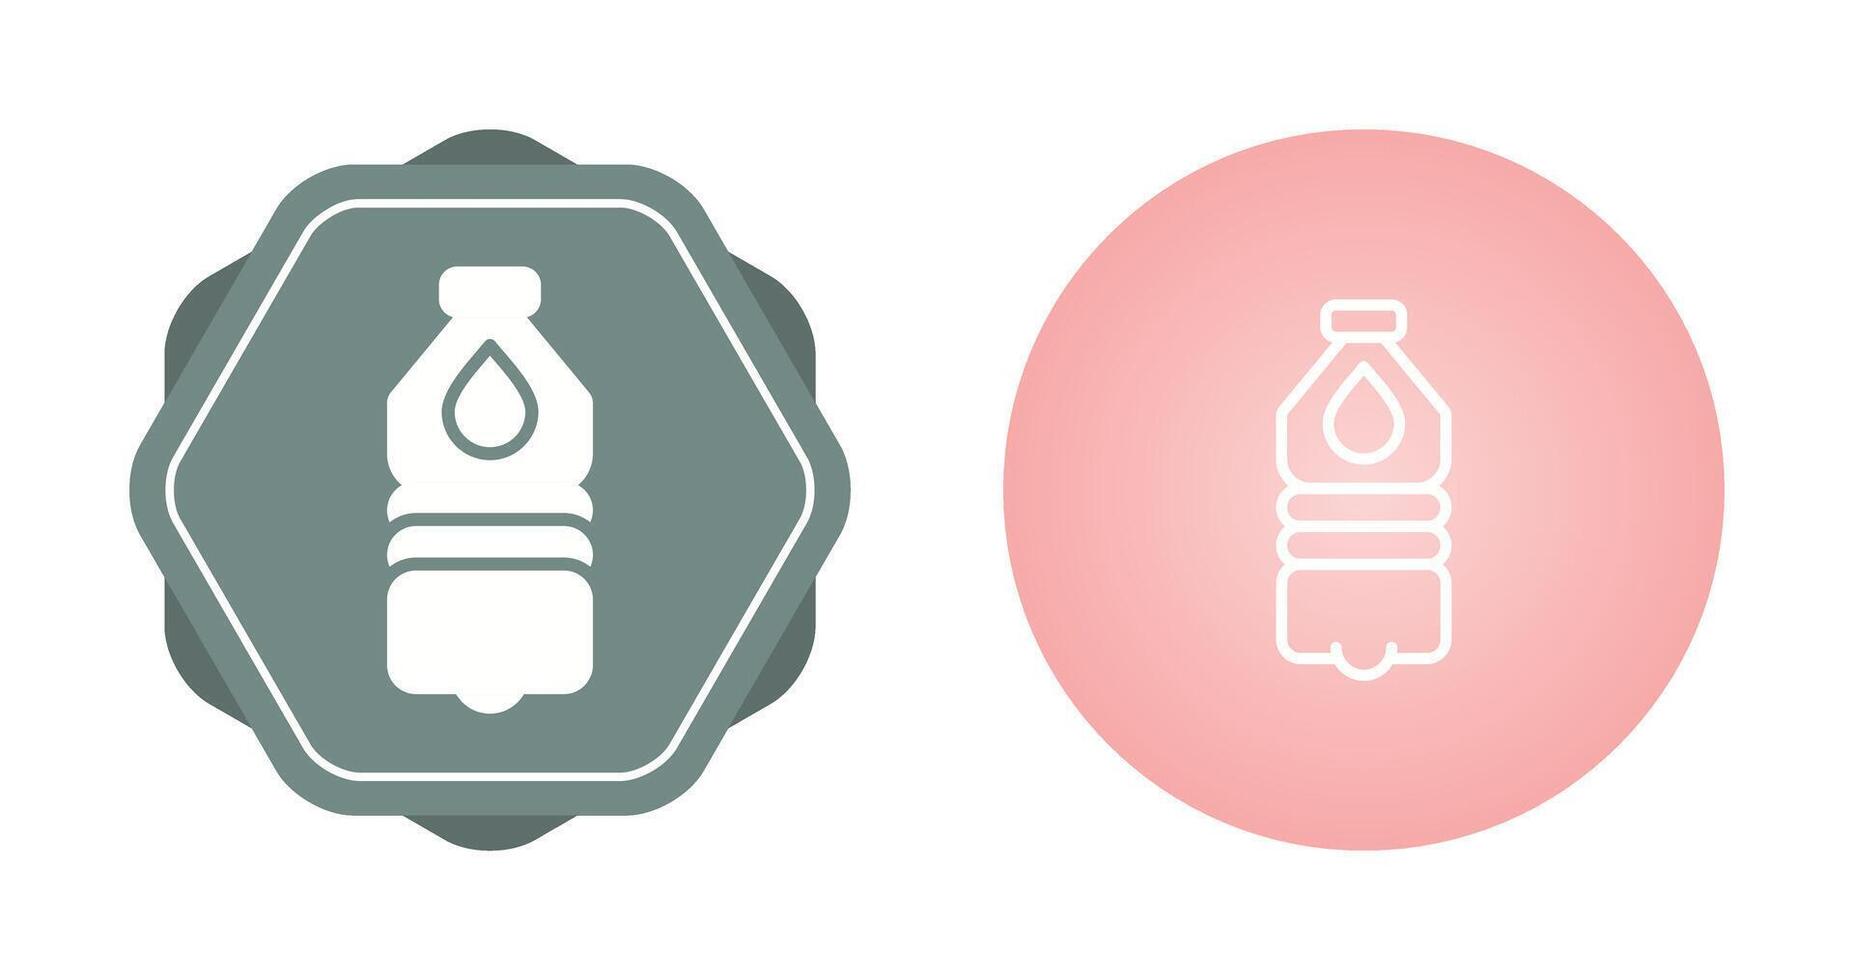 Water bottle Vector Icon